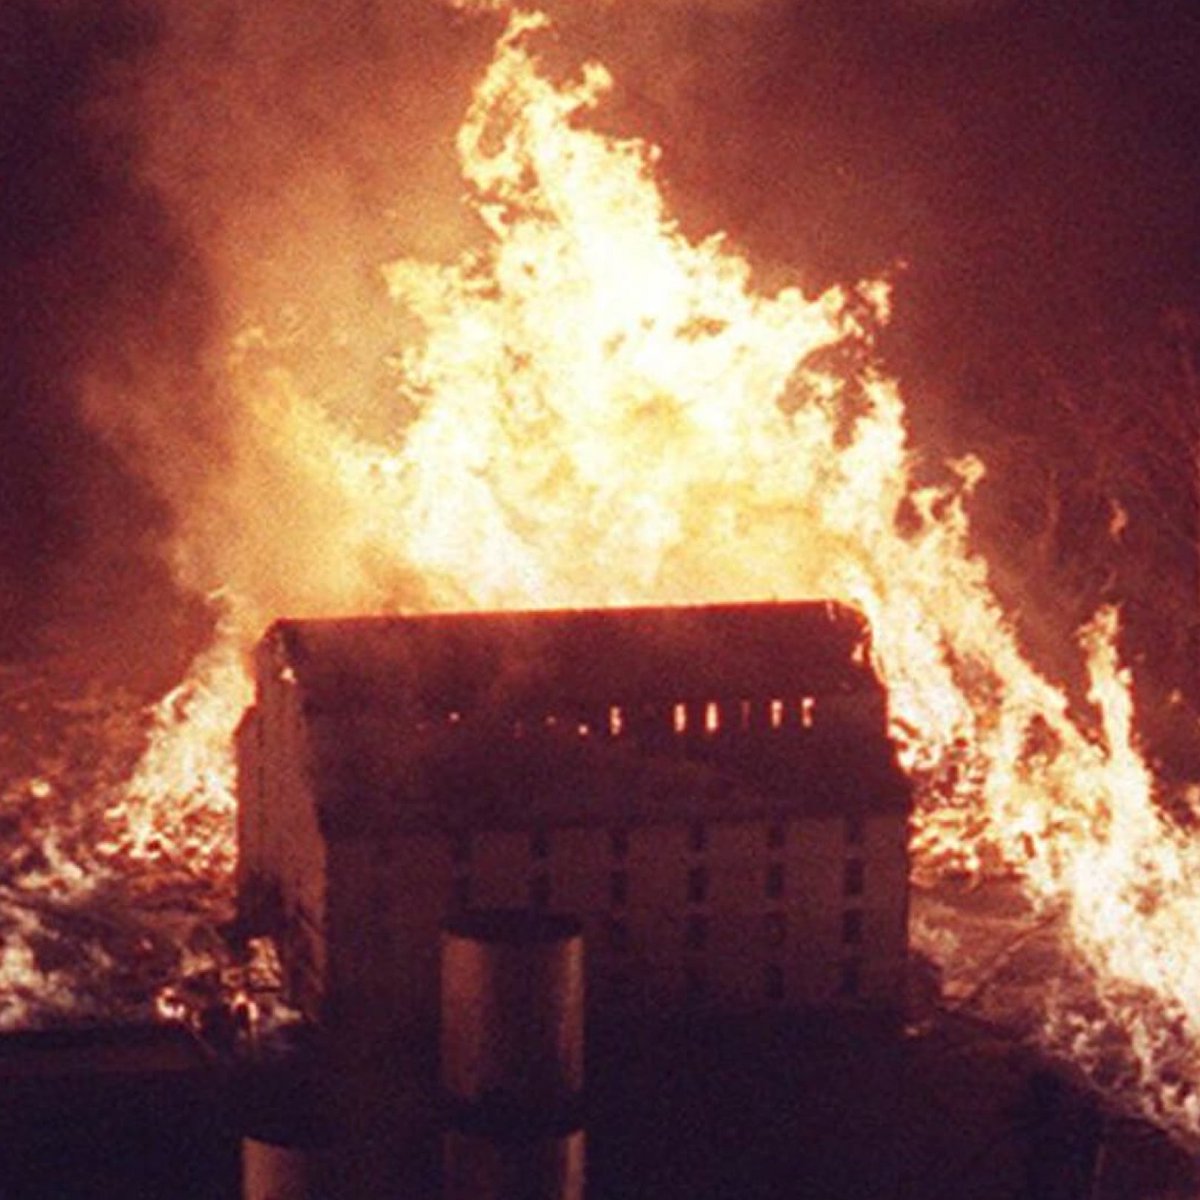 On this day 27 years ago, a massive fire broke out at the Old Heaven Hill Springs Distillery in Bardstown. Over 92,000 barrels of whiskey were destroyed, but thanks to the hard work of our team and help from others in the industry, we were able to rebuild stronger than ever.